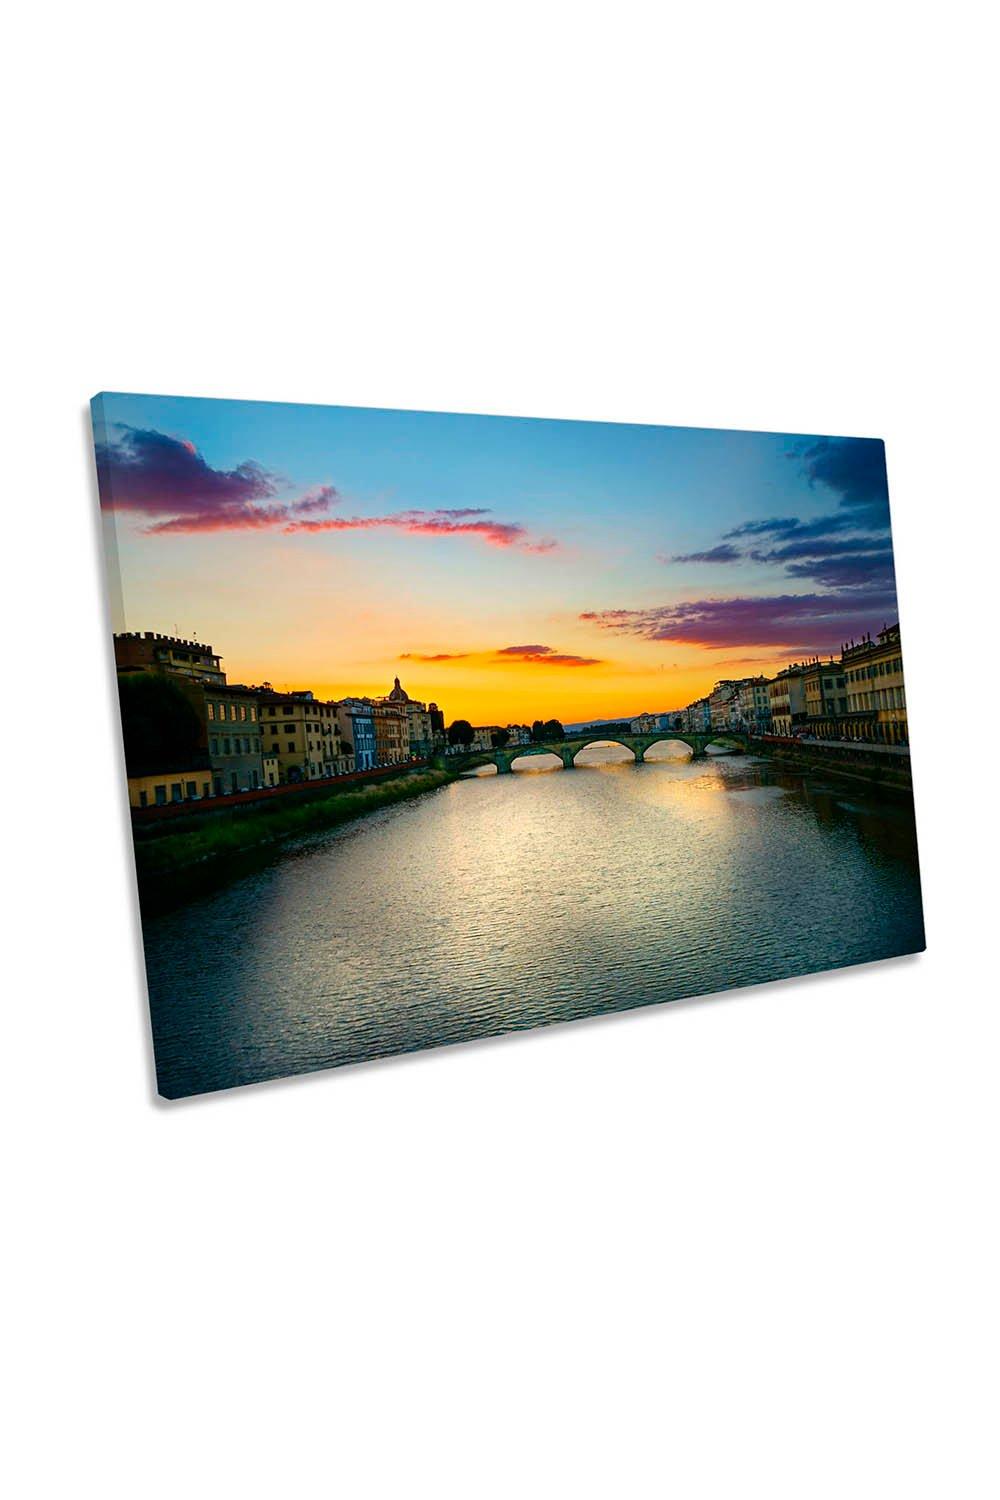 Florence Italy Bridge City Sunset Canvas Wall Art Picture Print